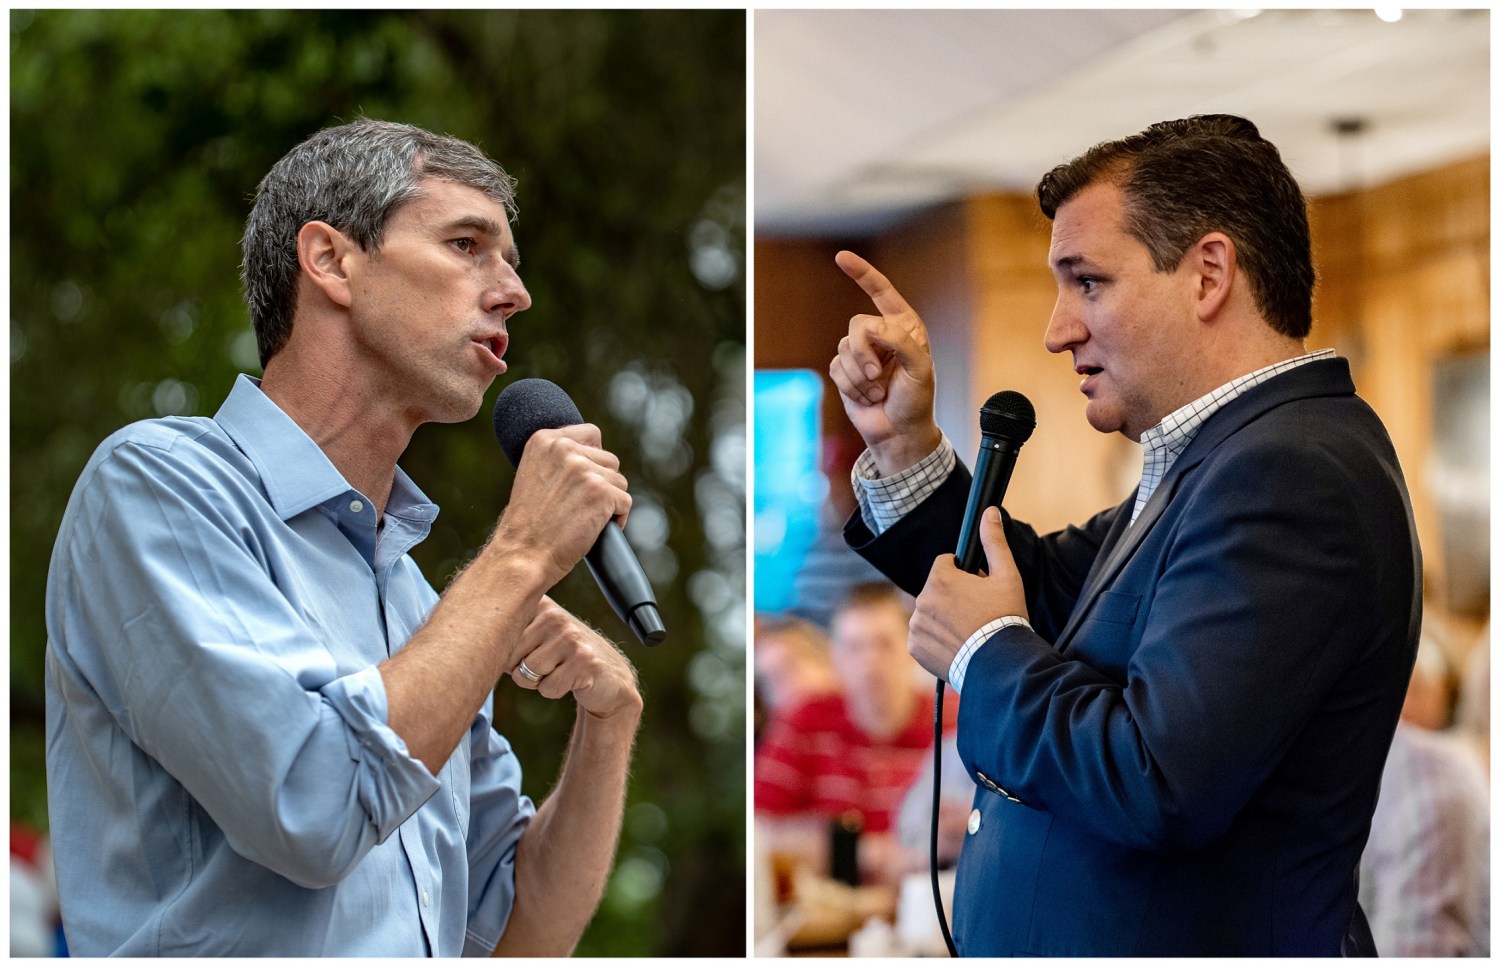 FILE PHOTOS: A combination photo shows U.S. Rep. Beto O'Rourke (L) and U.S. Senator Ted Cruz (R) speaking to supporters in Del Rio, Texas, on September 22, 2018 and in Columbus, Texas, U.S. on September 15, 2018 respectively.   REUTERS/Sergio Flores/File Photos - RC1F56113730